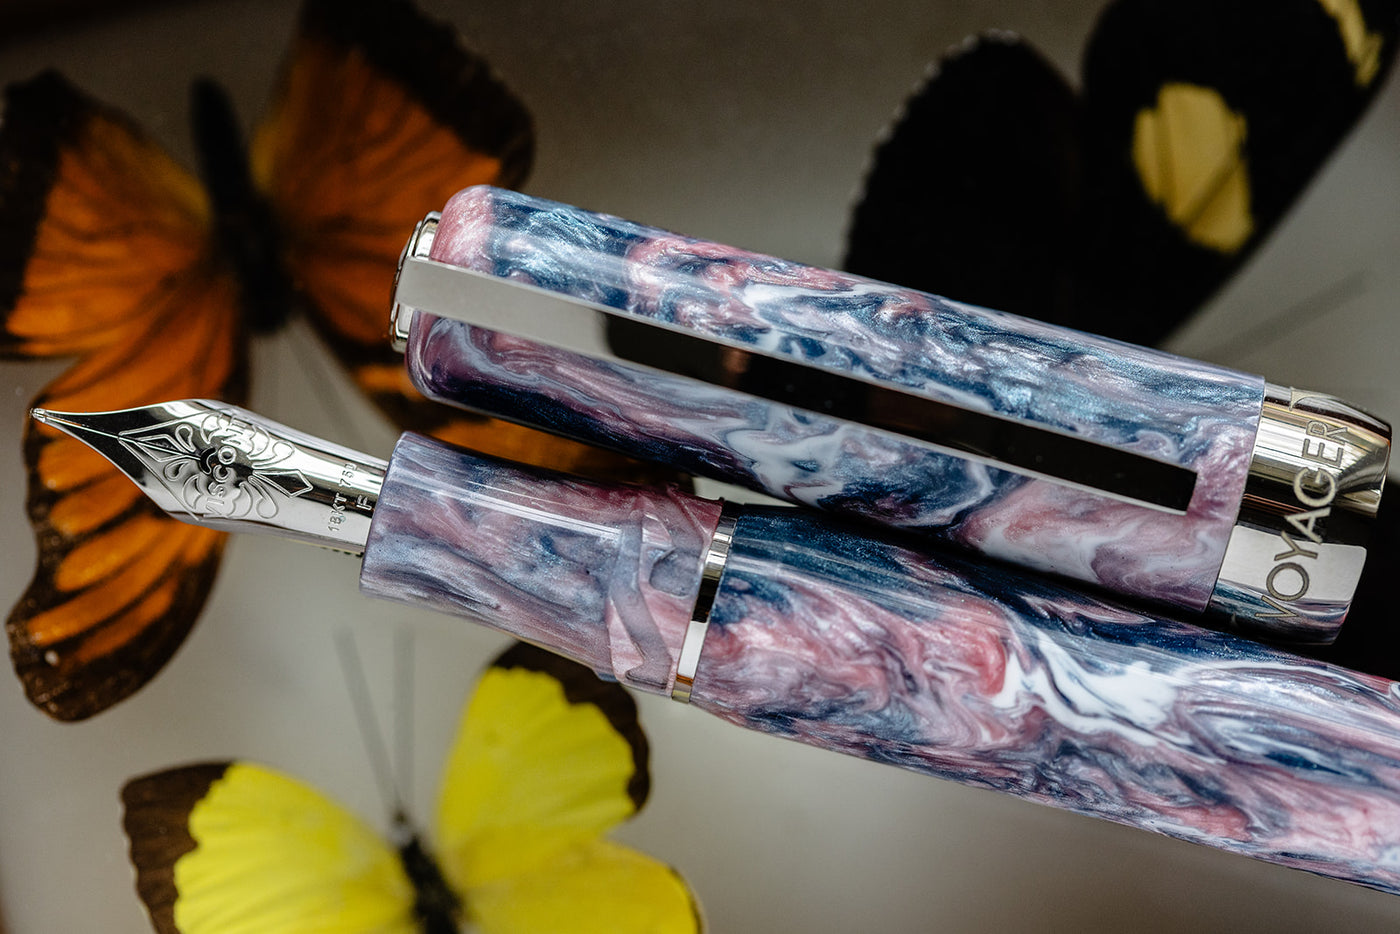 Visconti Voyager Mariposa Fountain Pen - Painted Beauty (Limited Edition)